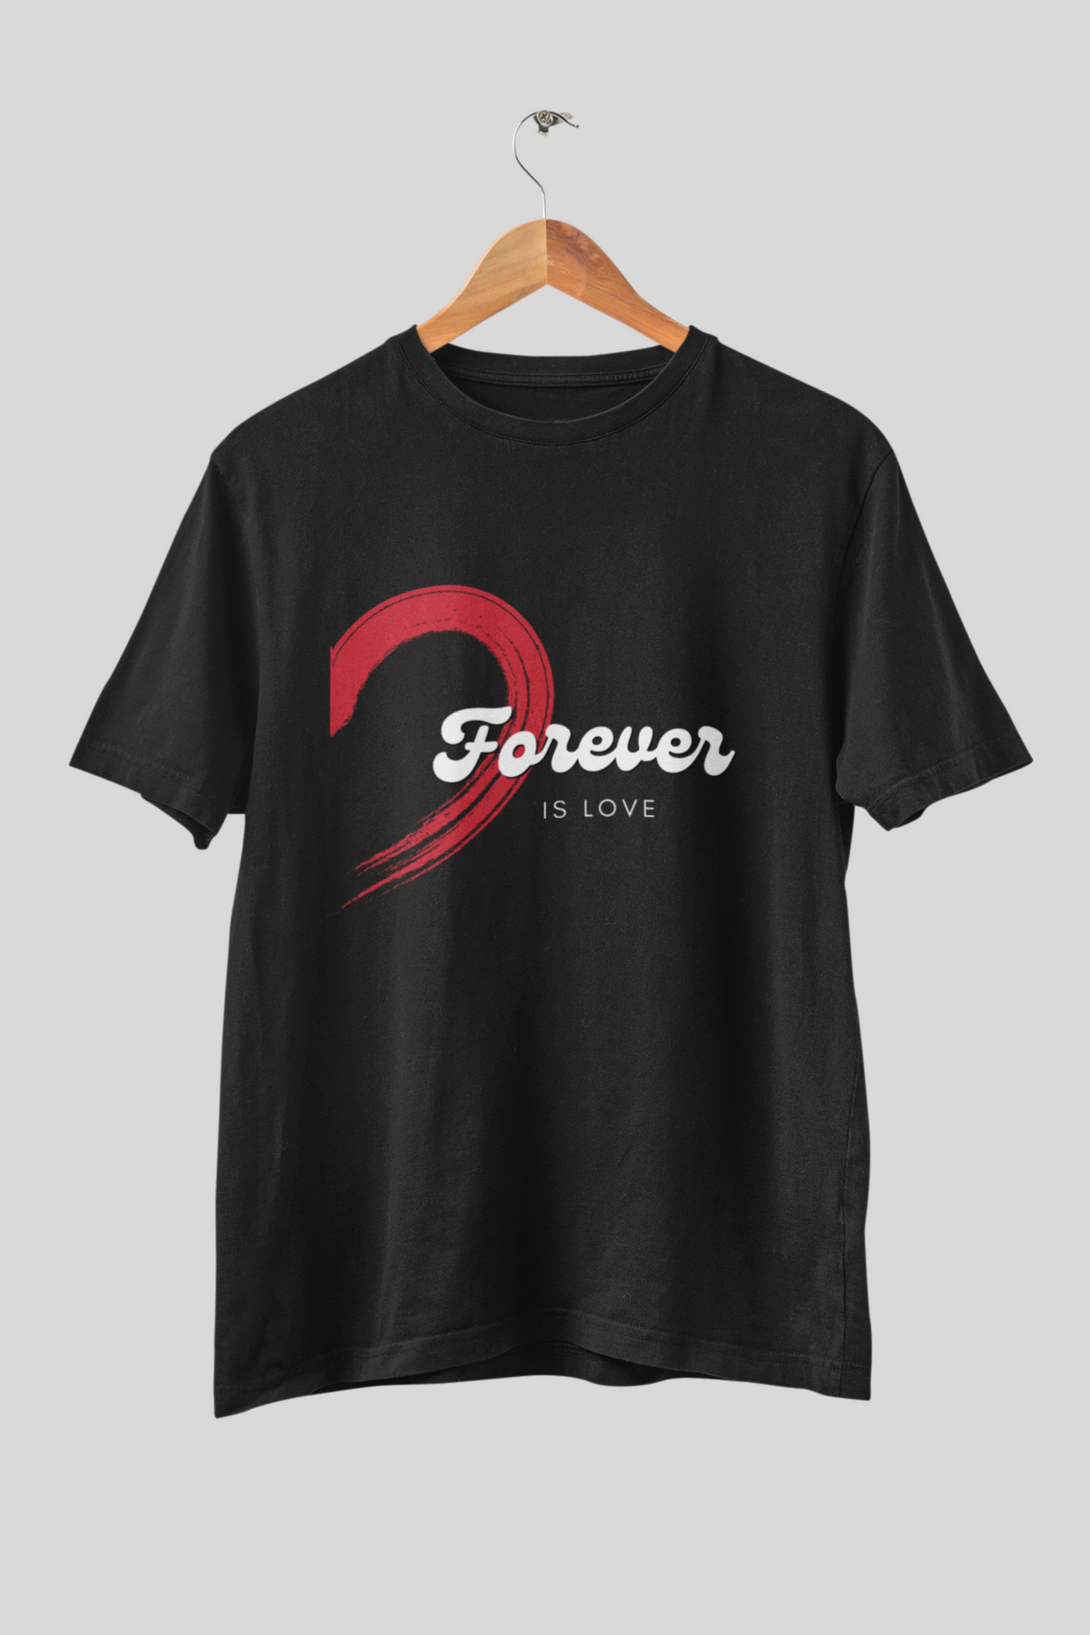 Together Forever Couple T Shirt - WowWaves - 5